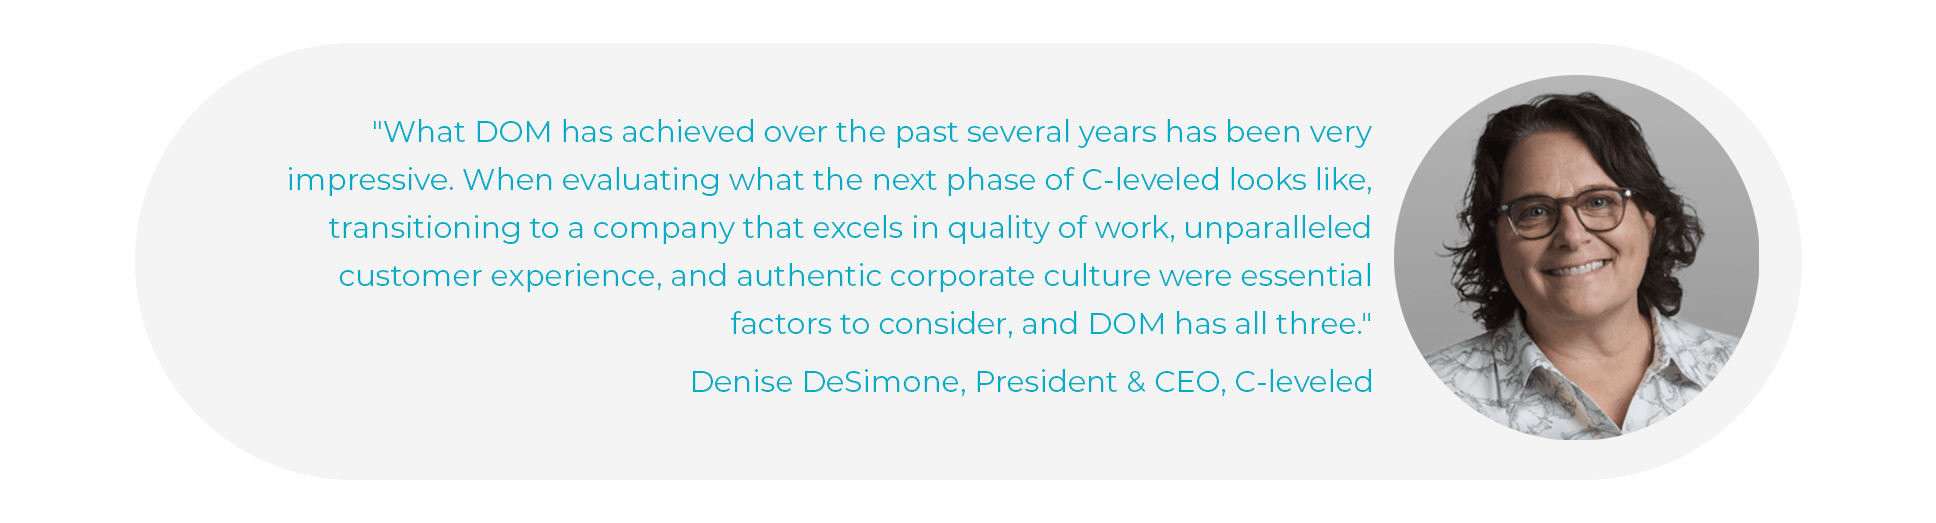 "What DOM has achieved over the past several years has been very impressive," said Denise DeSimone, President and CEO of C-leveled. "When evaluating what the next phase of C-leveled looks like, transitioning to a company that excels in quality of work, unparalleled customer experience, and authentic corporate culture were essential factors to consider, and DOM has all three."